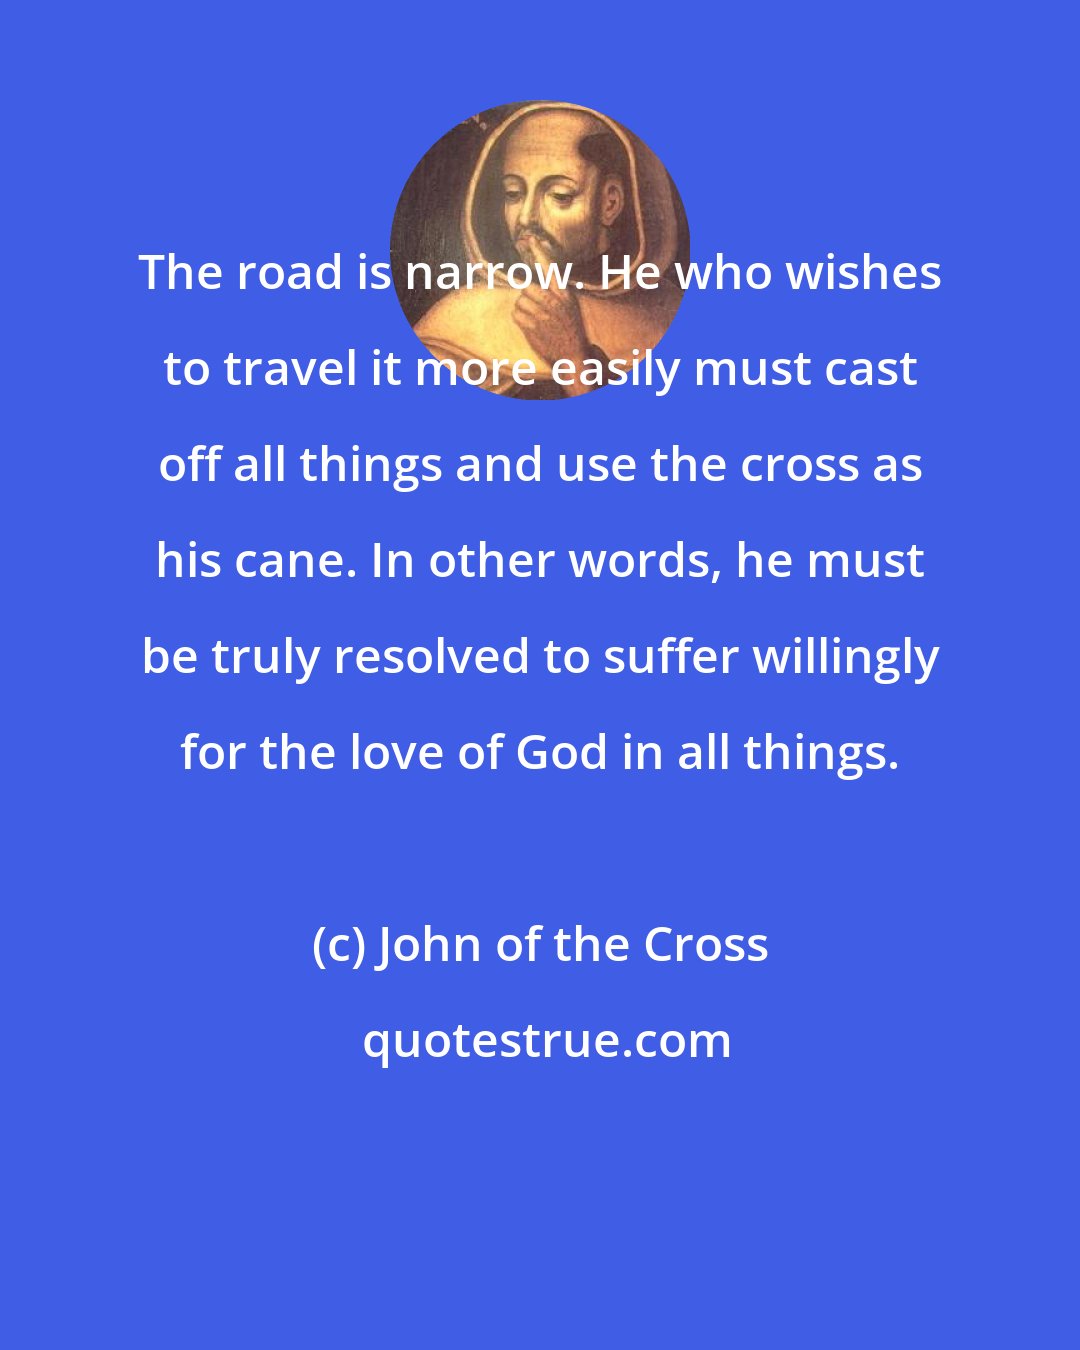 John of the Cross: The road is narrow. He who wishes to travel it more easily must cast off all things and use the cross as his cane. In other words, he must be truly resolved to suffer willingly for the love of God in all things.